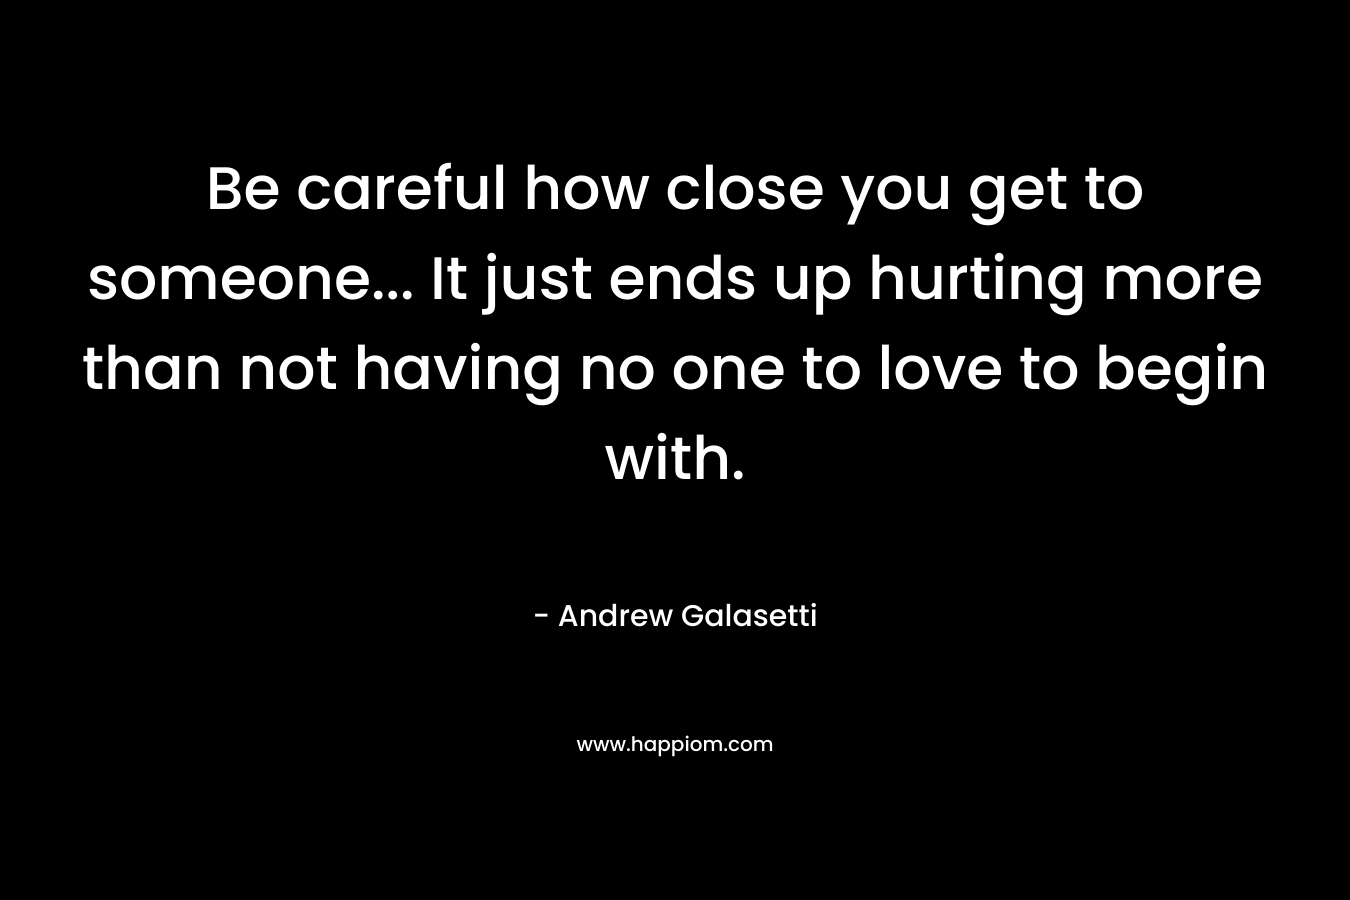 Be careful how close you get to someone… It just ends up hurting more than not having no one to love to begin with. – Andrew Galasetti